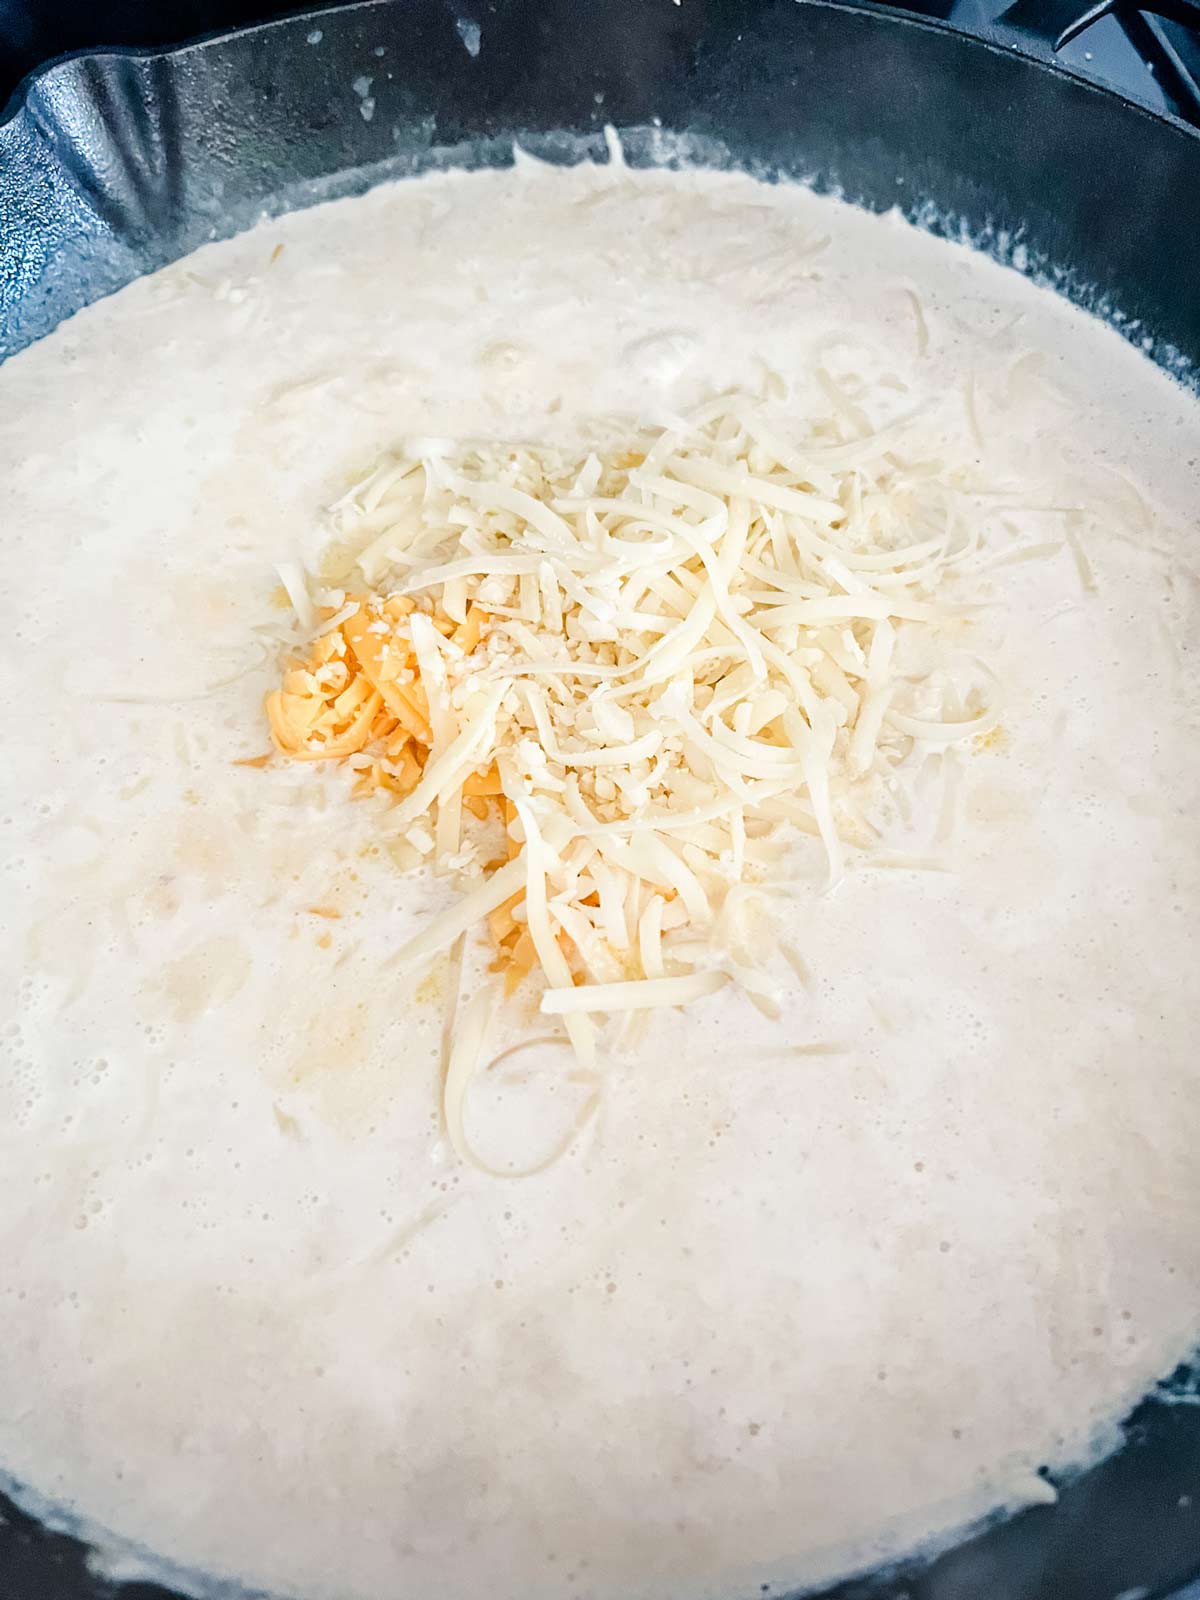 A cream sauce with shredded cheese on top in a cast iron skillet.